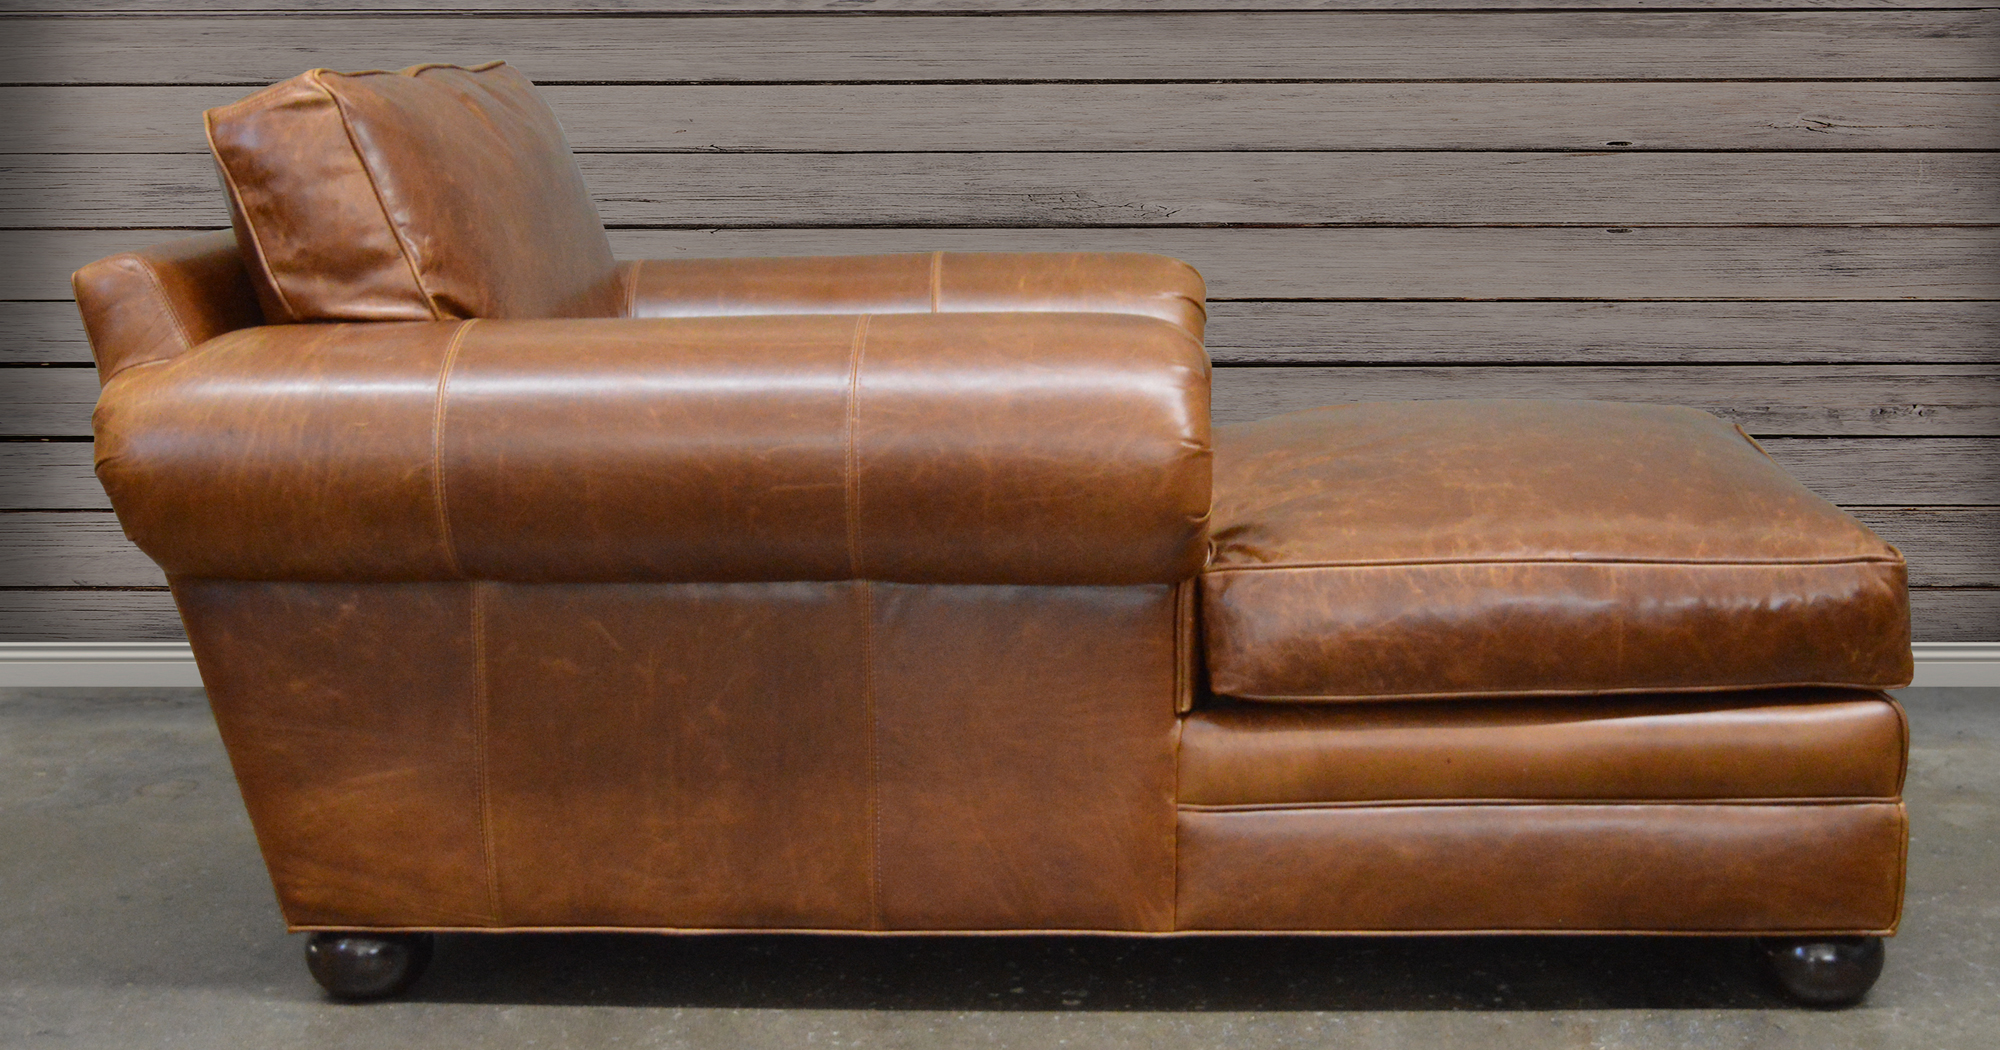 Langston Leather Chaise in Italian Brompton Classic Vintage